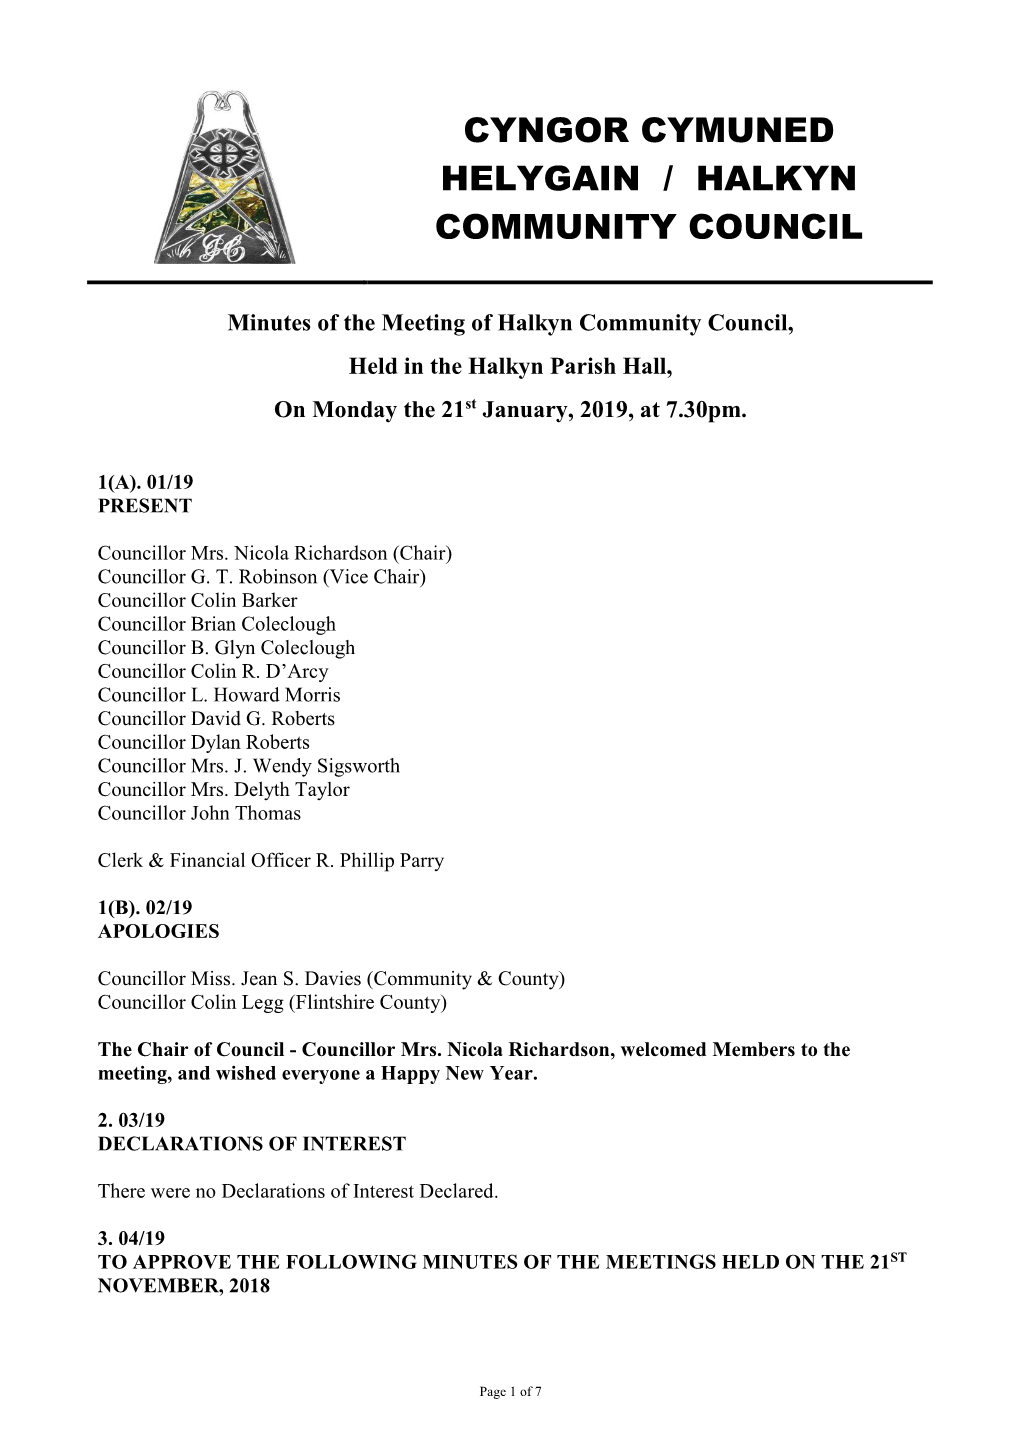 Minutes of the Meeting of Halkyn Community Council